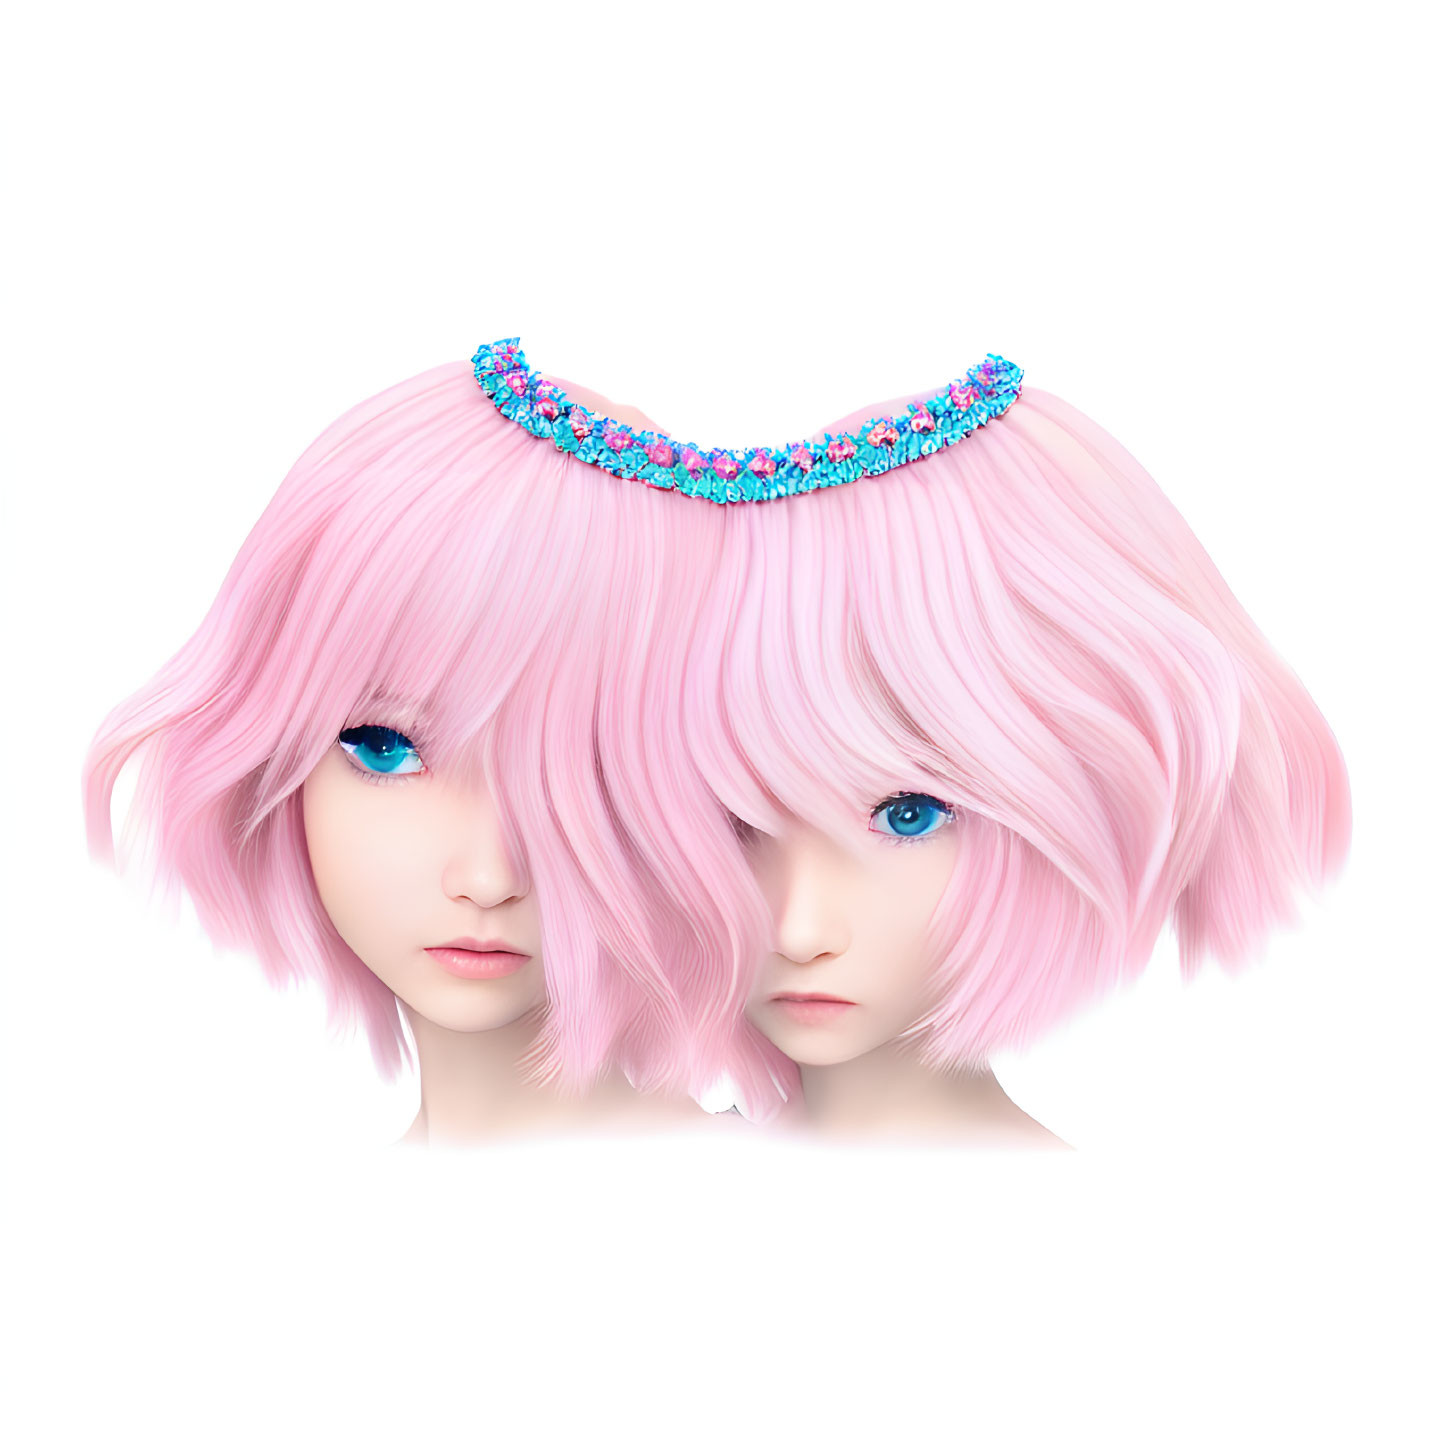 Identical Female Animated Characters with Pink Hair and Blue Eyes